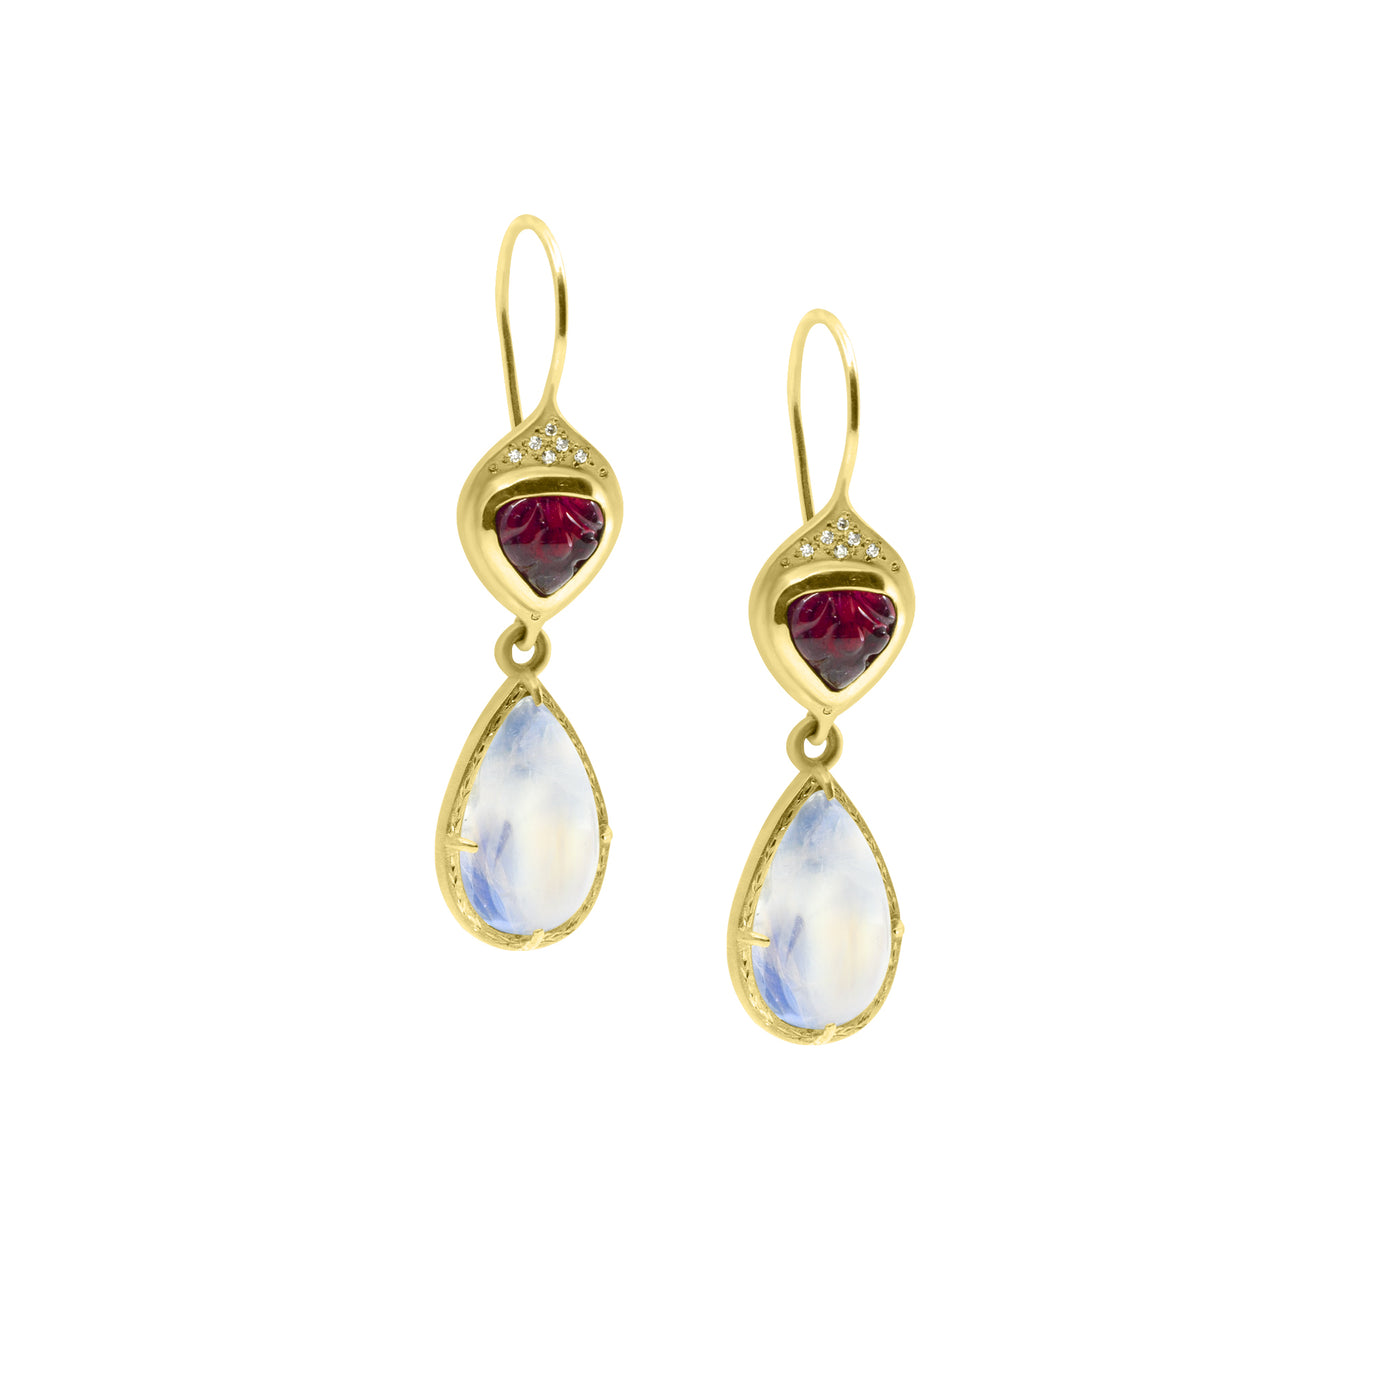 Prong Pear Moonstone Earrings with Rubellite Charms